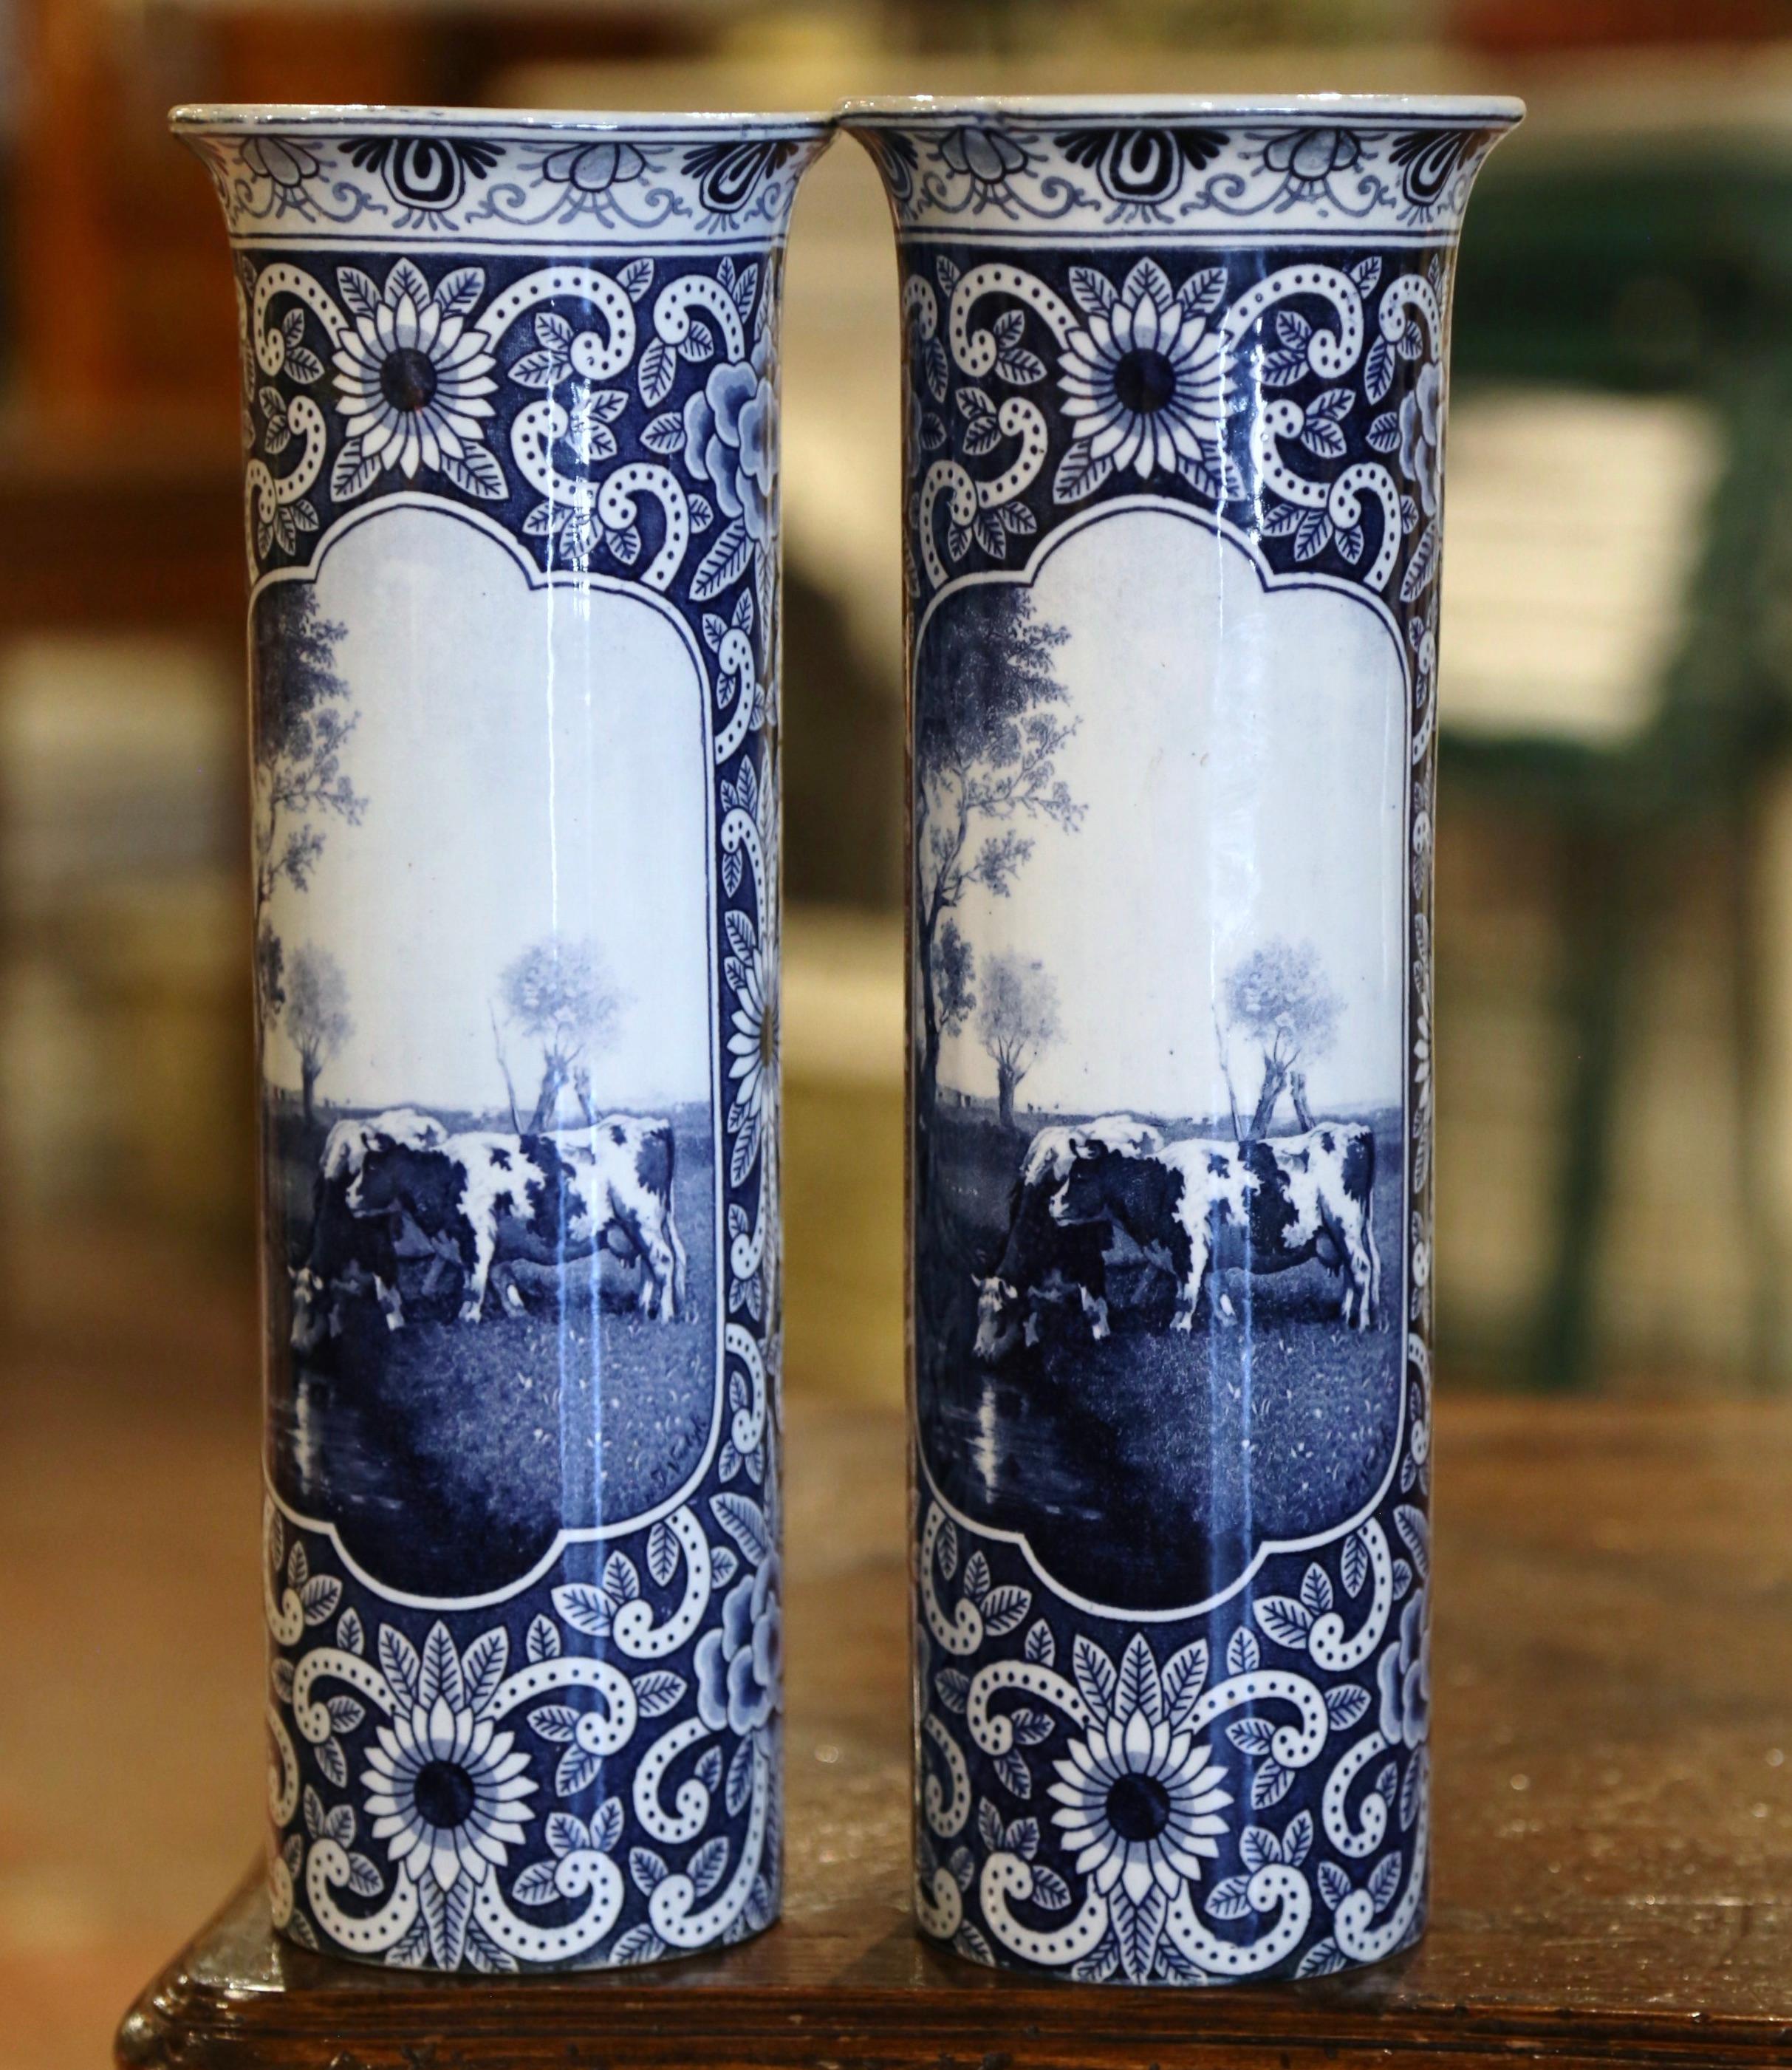 Pair of 19th Century Dutch Hand Painted Faience Delft Vases with Cattle Motifs For Sale 4